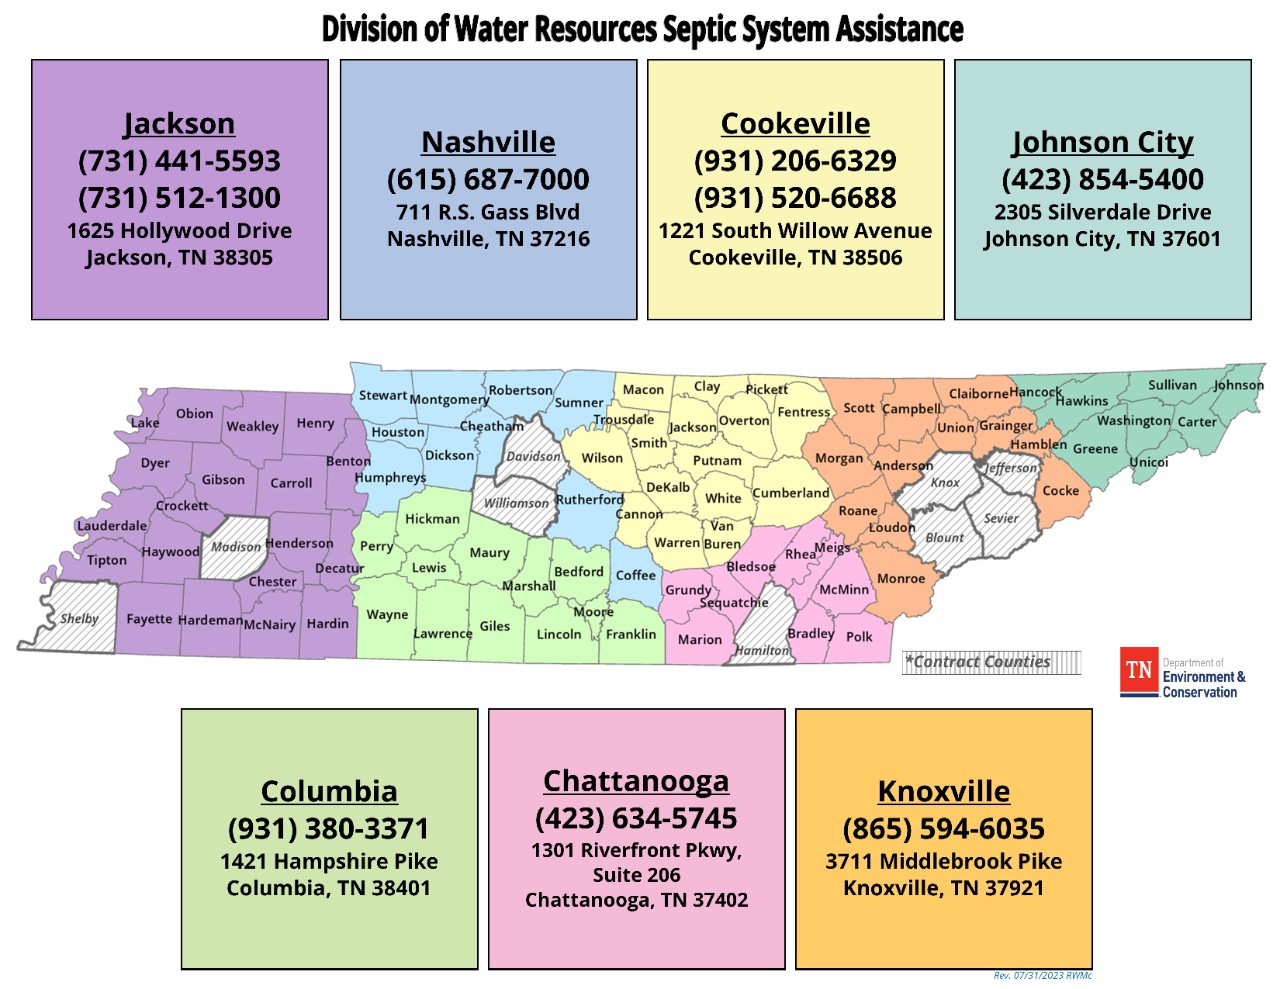 Division of Water Resources Septic System Assistance